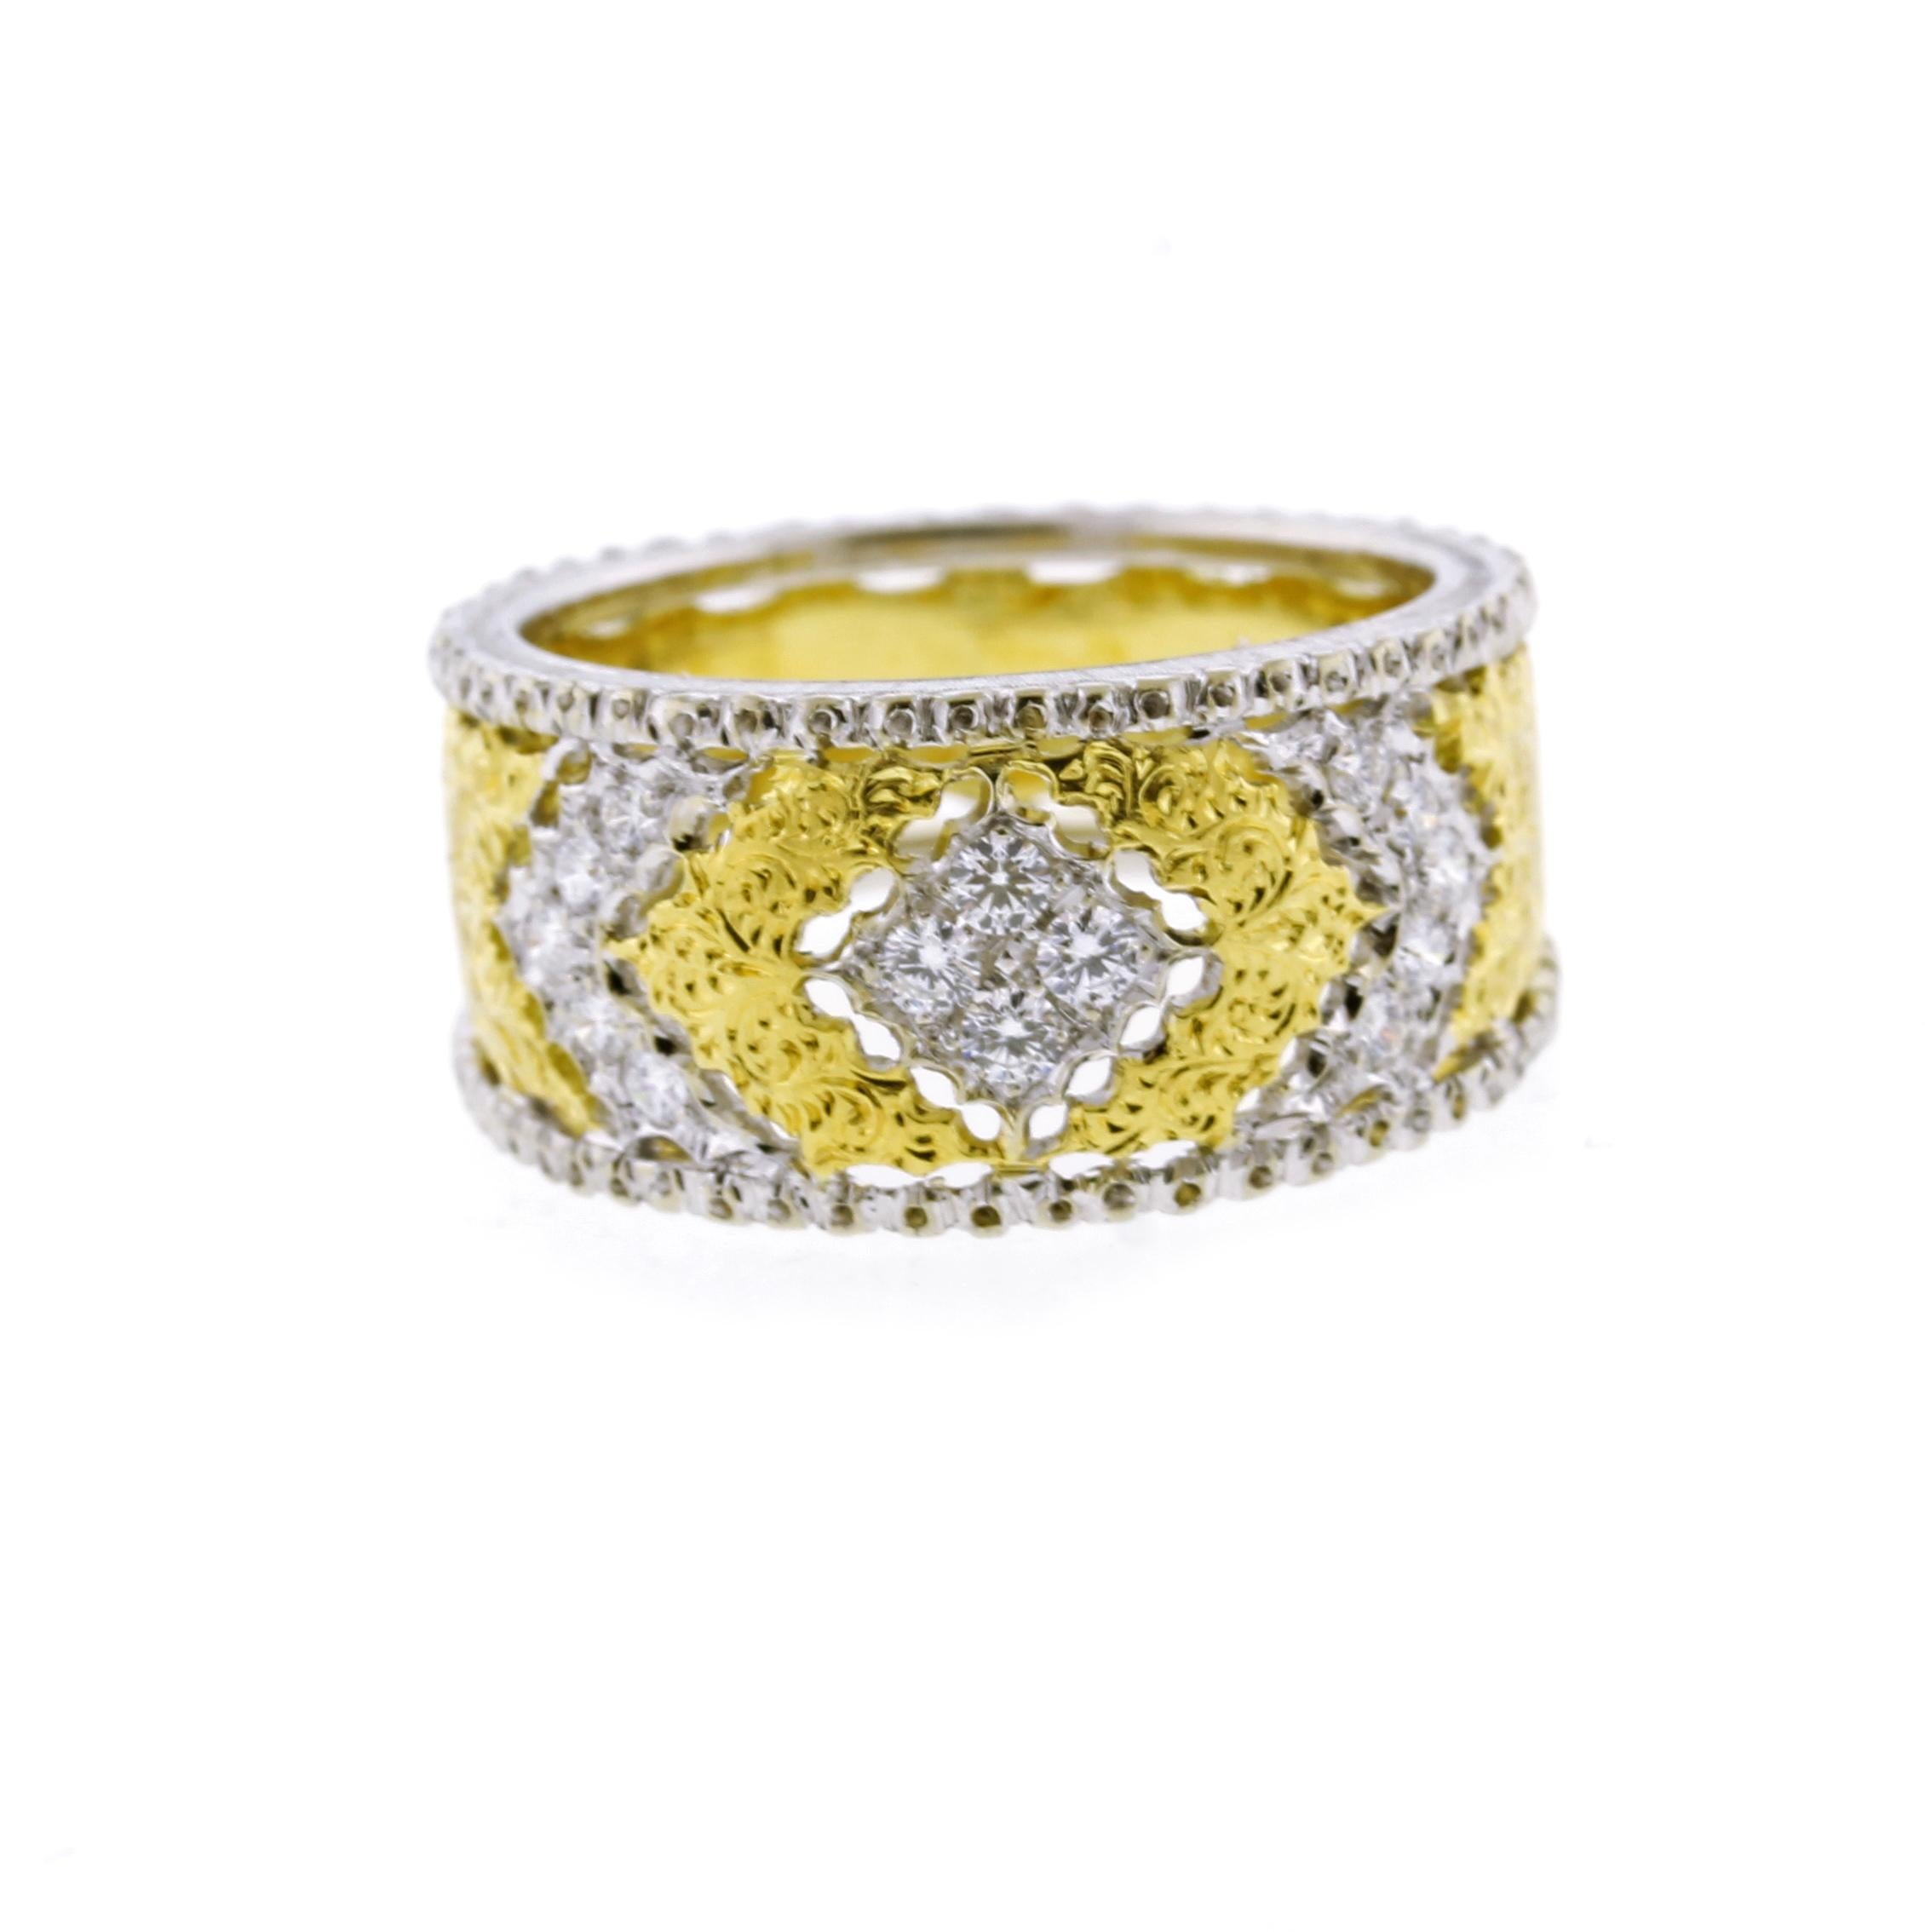 From Italian master jeweler Buccellati, a tapered hand engraved two tone toned diamond band ring
♦ Designer: V
♦ Metal: 18 karat
♦ Circa 2000s
♦ 14 Diamonds=.50ct
♦ 10mm tappers to 7mm wide
♦ Size 6¾
♦ Packaging: Pampillonia presentation box
♦